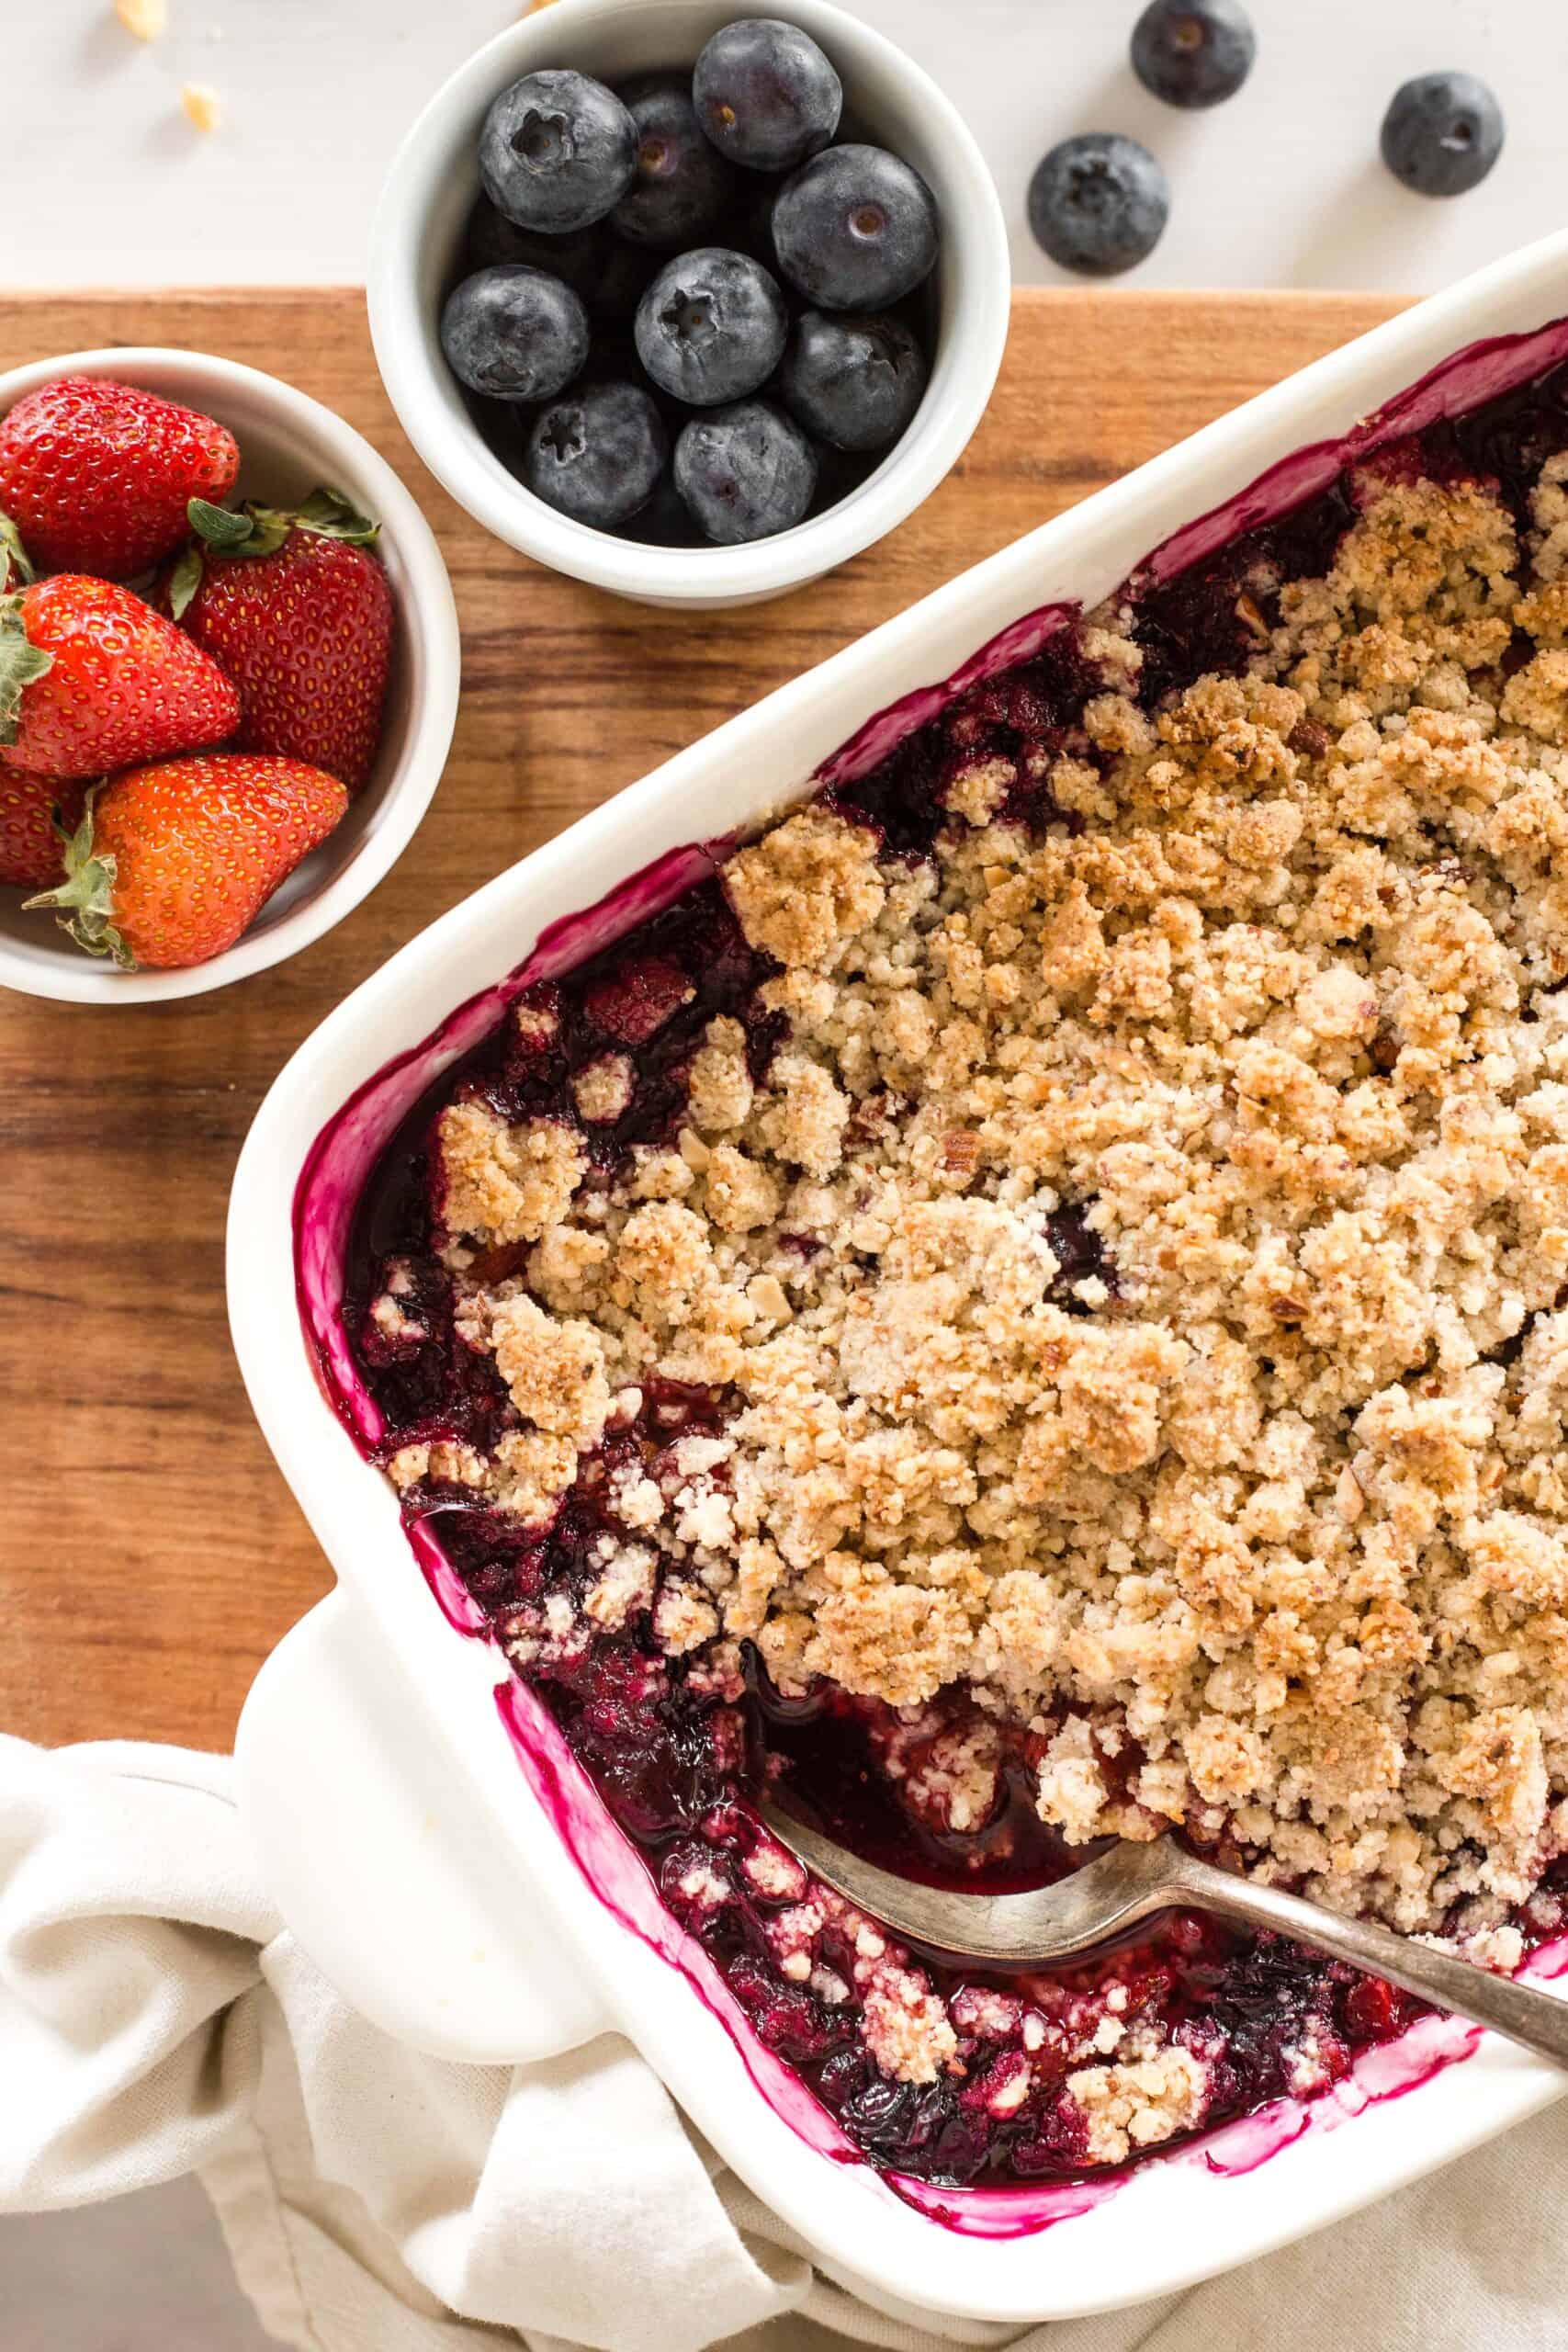 Gluten-free berry crumble and bowls of fresh berries on a wooden board.